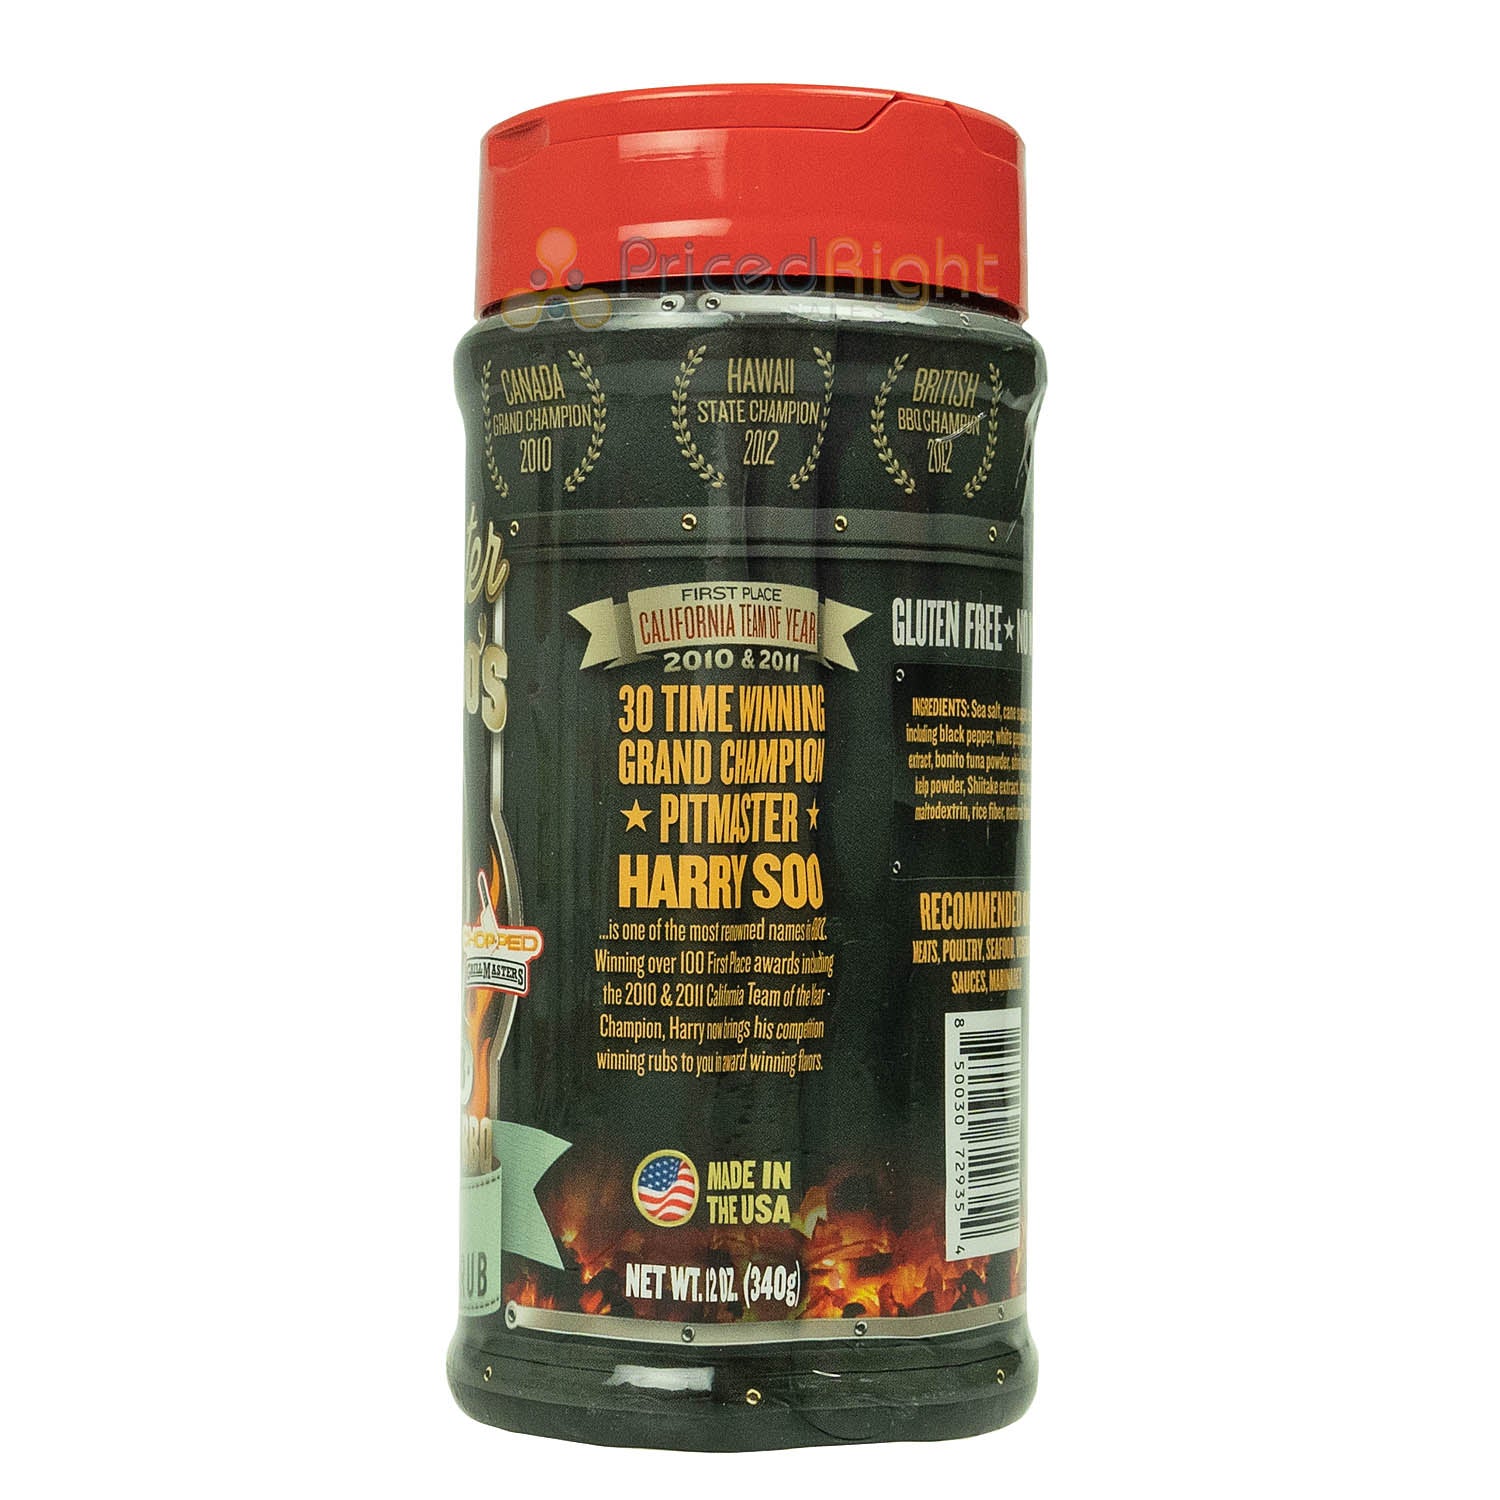 Slap Yo' Daddy Flavor Bomb Umami Rub With No MSG And All Natural Ingredients